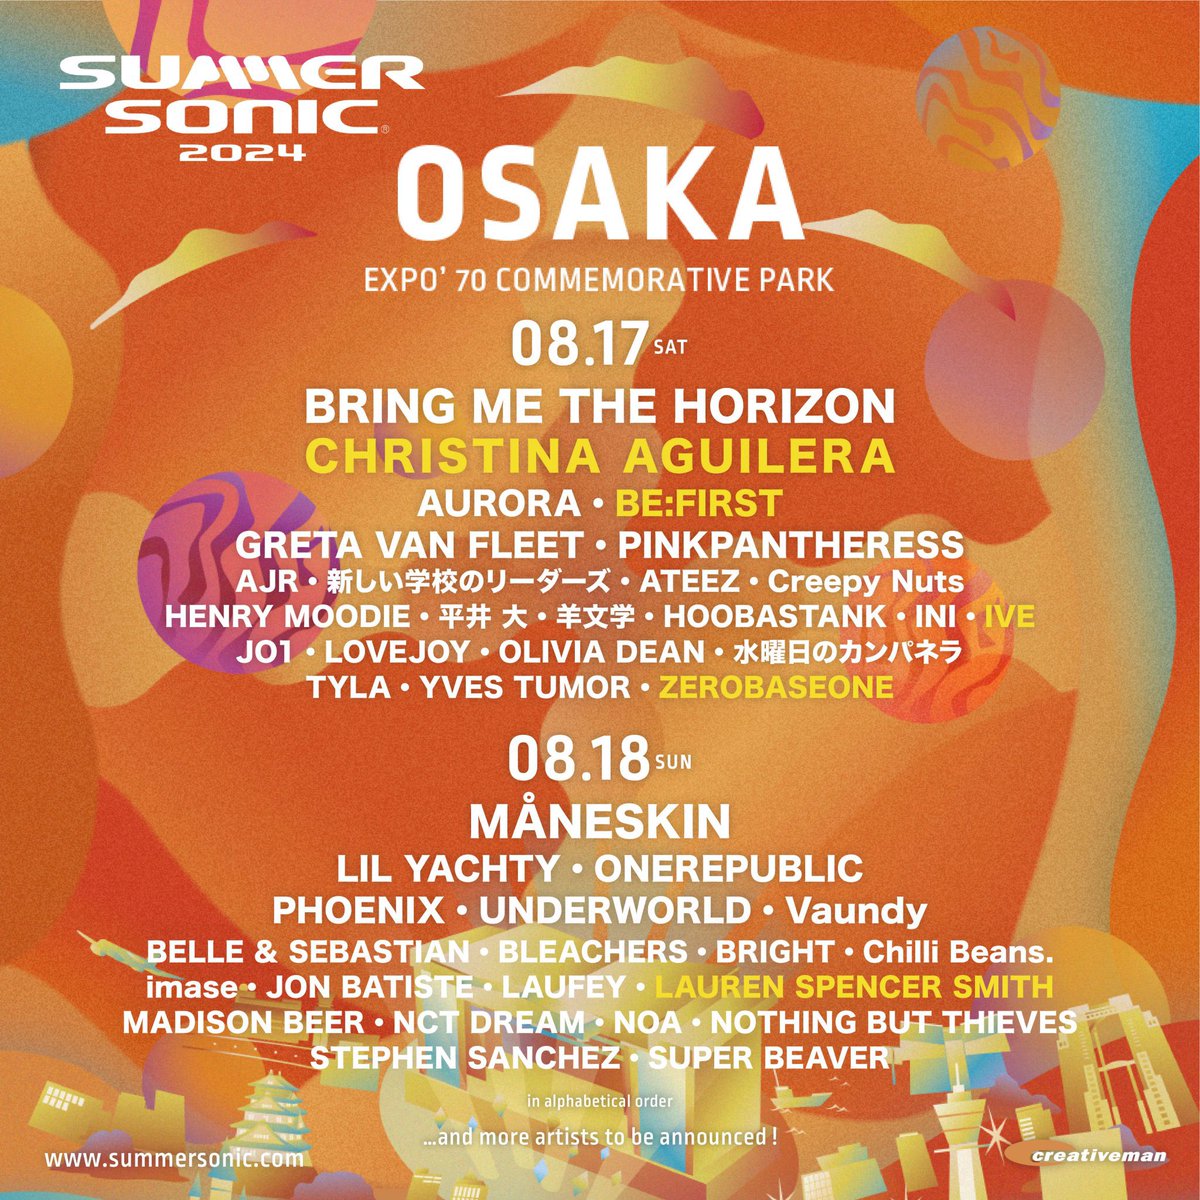 BE:FIRST in Sommer Sonic!
ATEEZさんも同じ日だ！
#BEFIRST #Summersonic2024